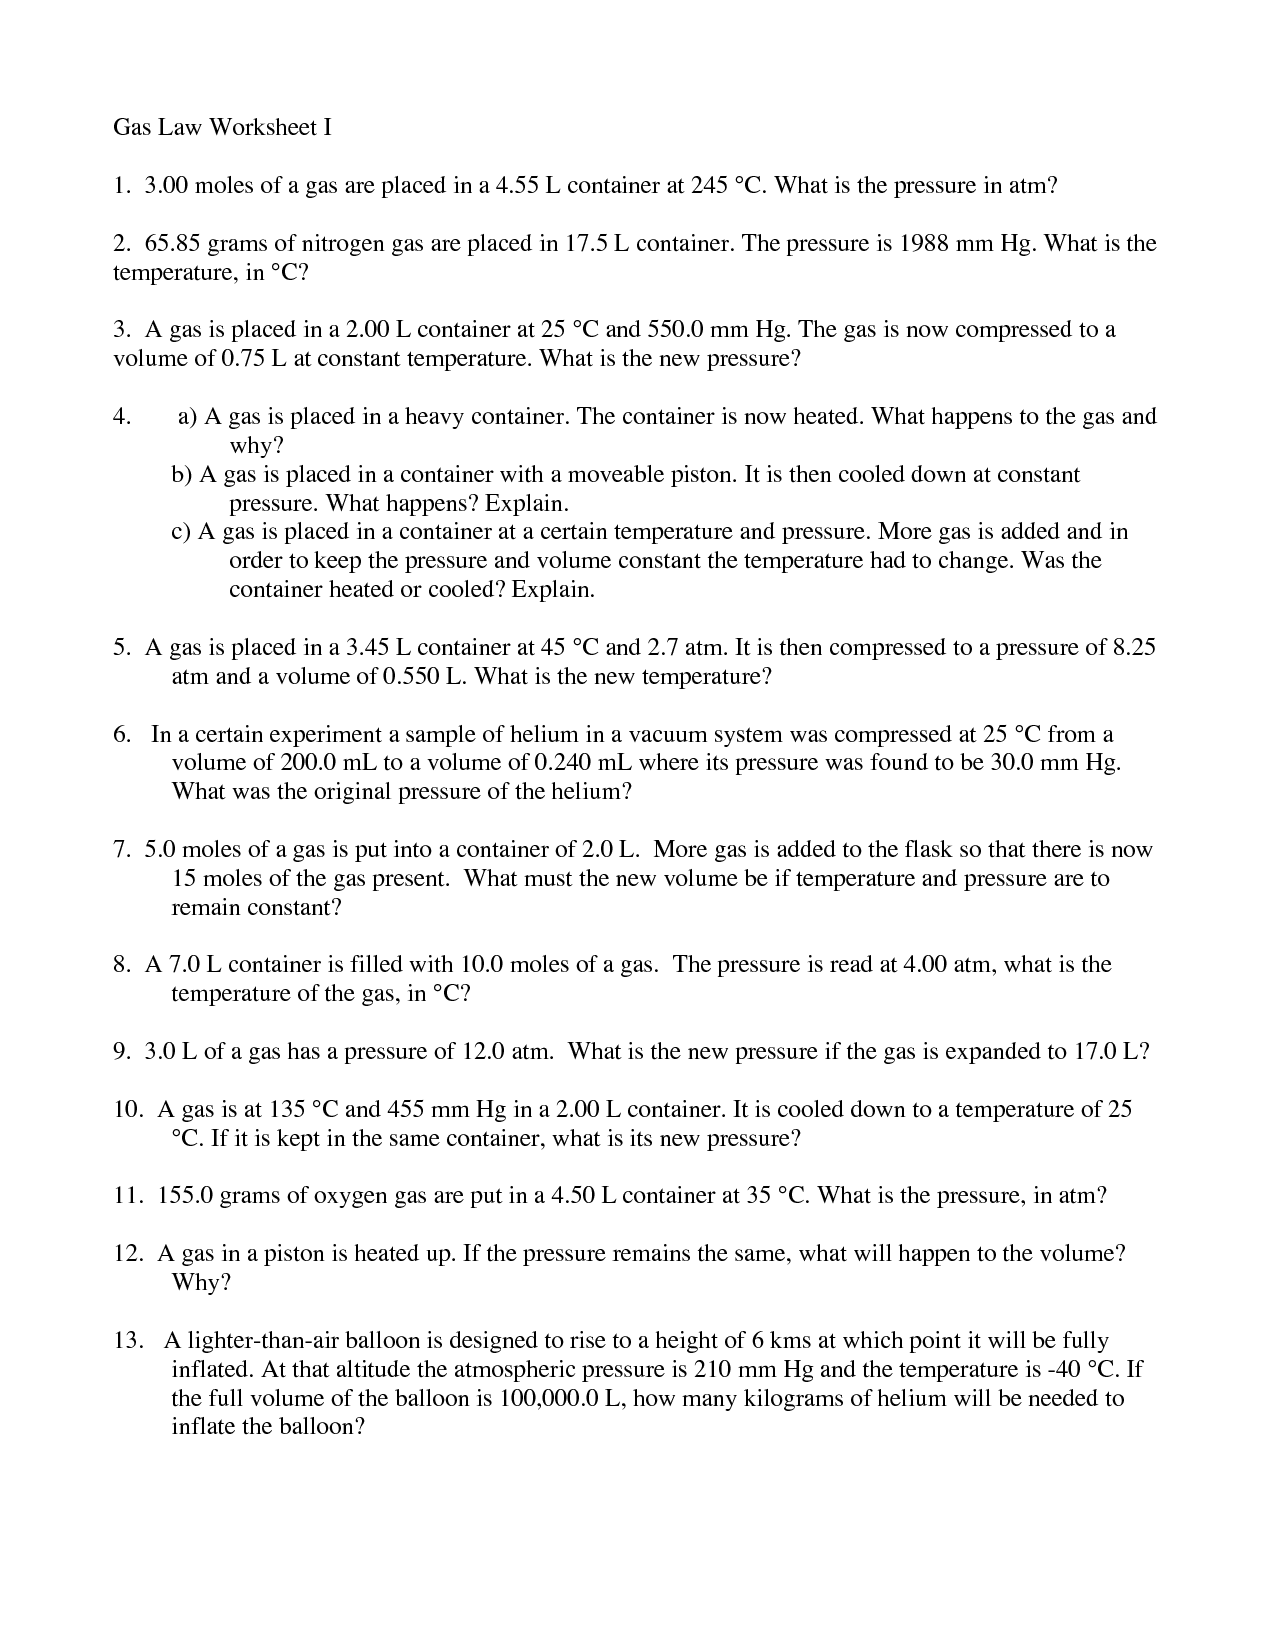 19-best-images-of-which-law-worksheet-answers-gas-laws-worksheet-answer-key-ohms-law